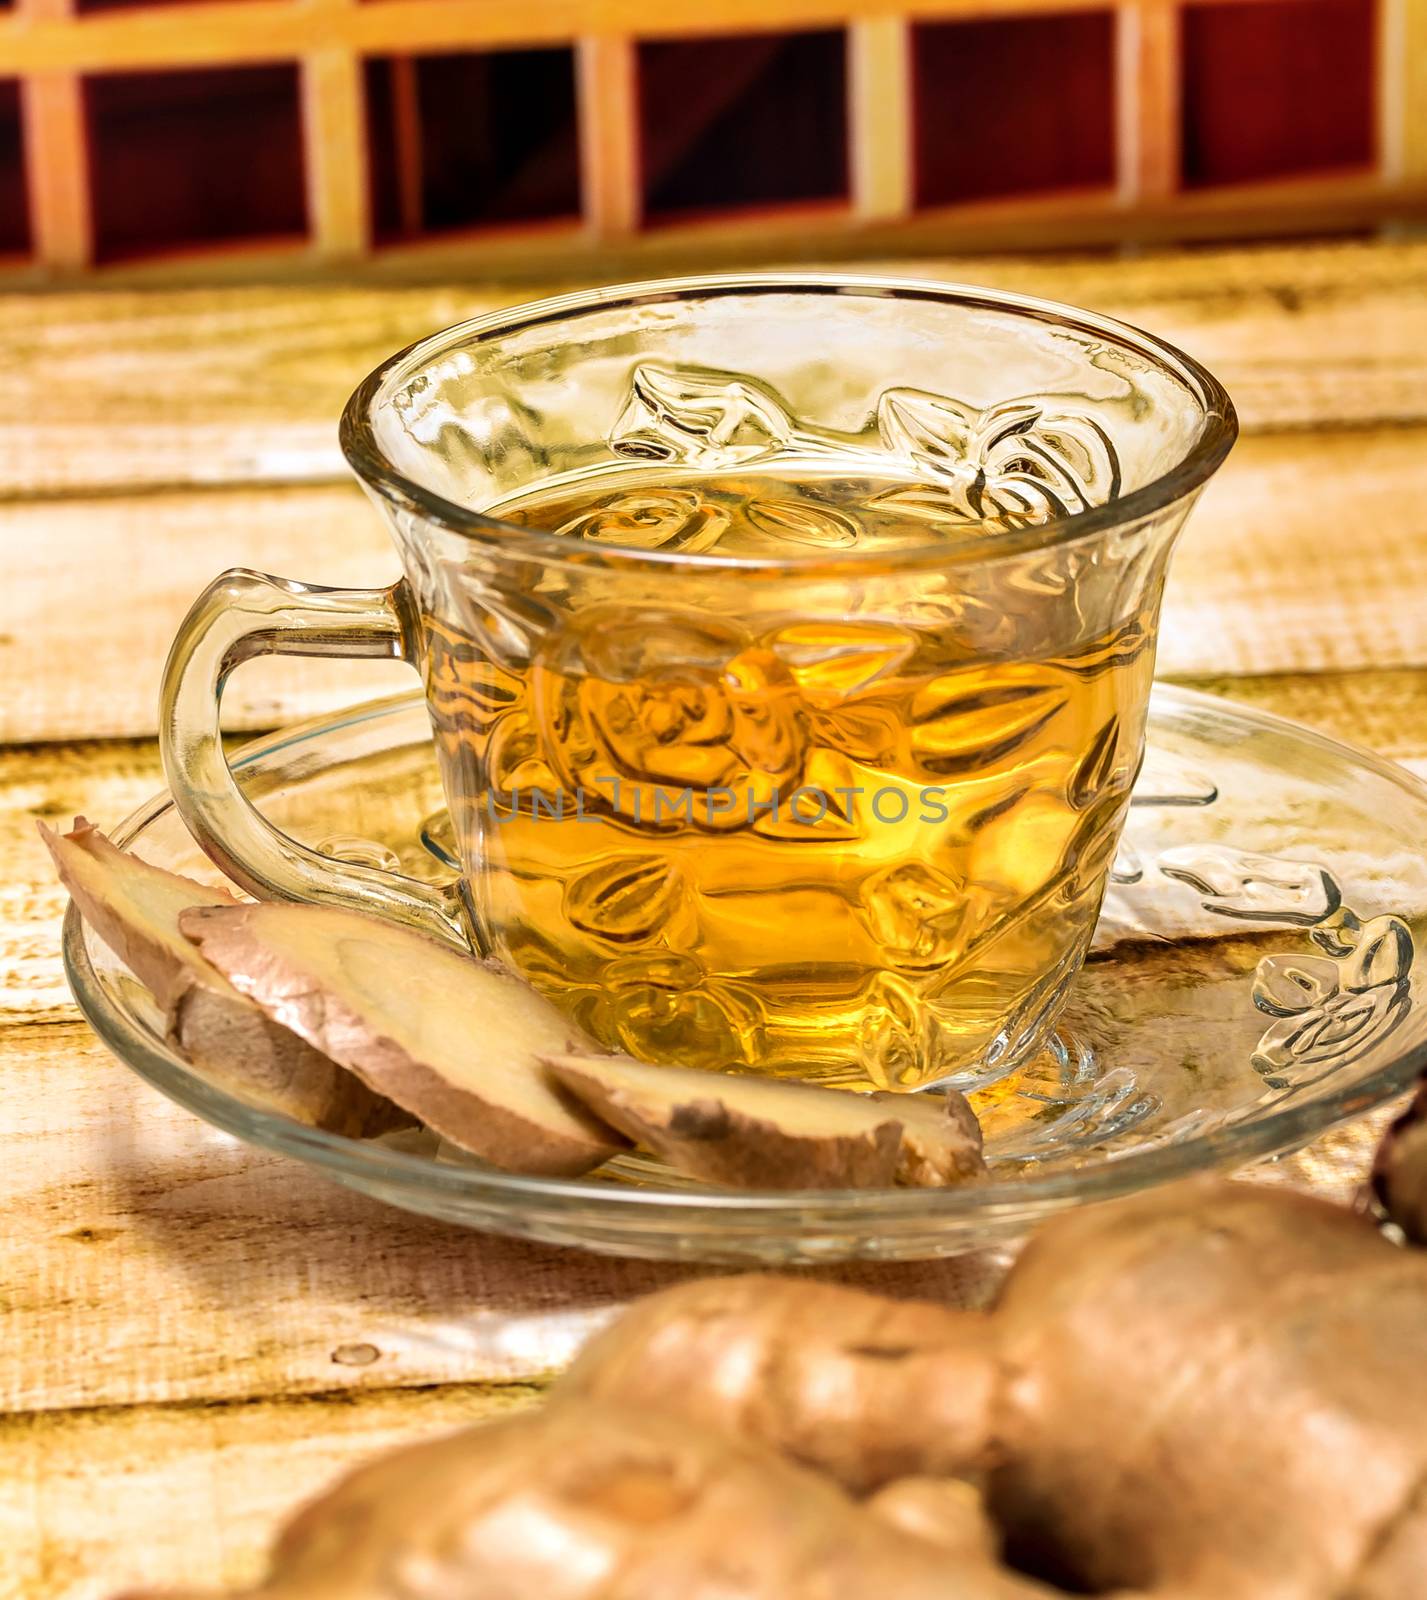 Refreshing Ginger Tea Representing Teas Organics And Spices